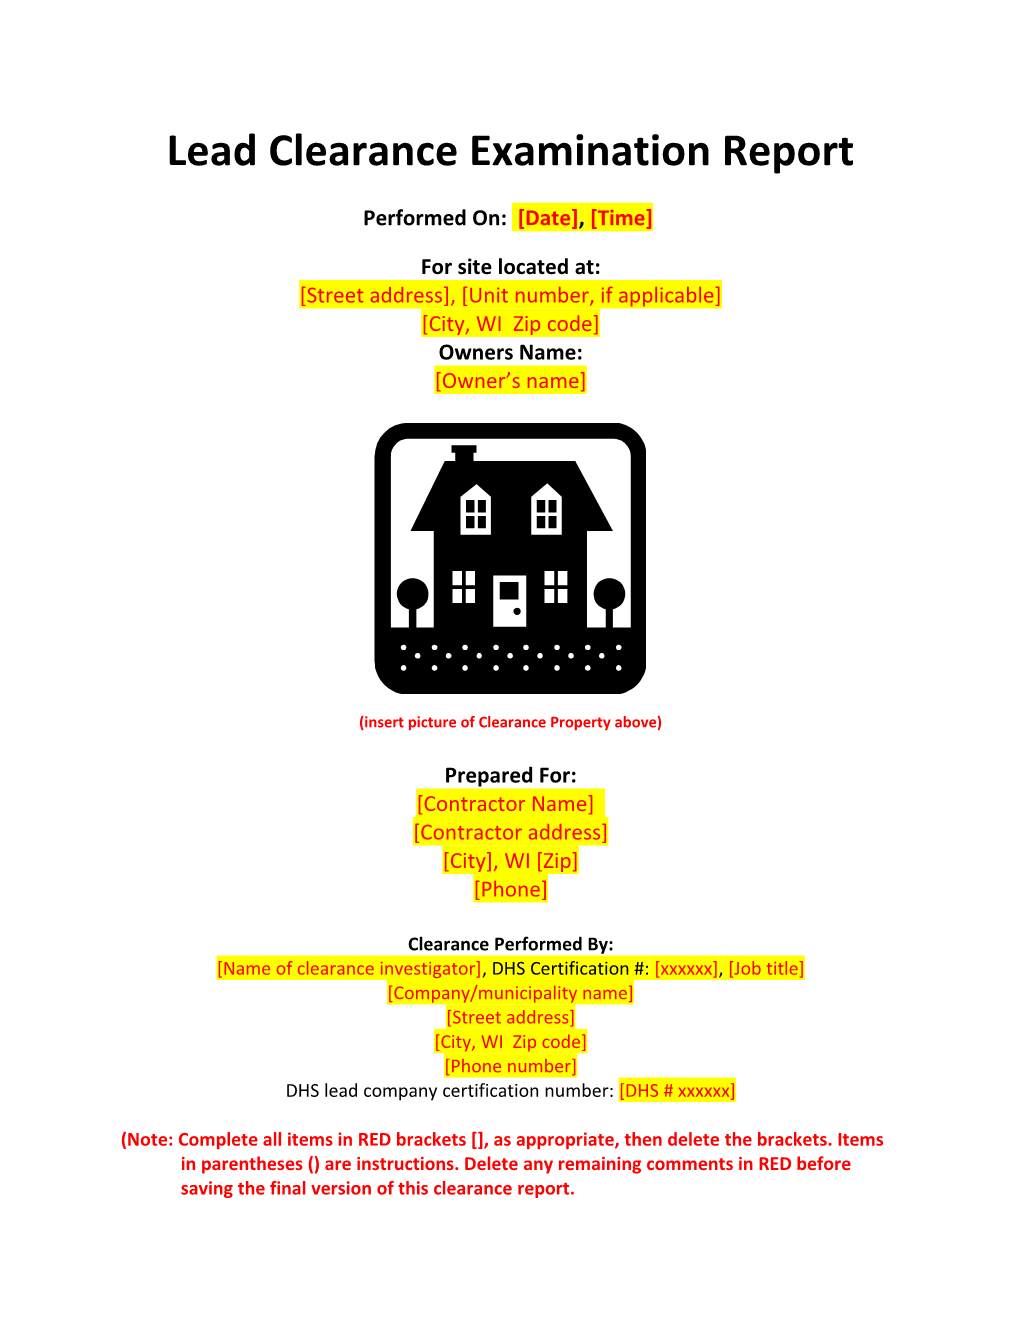 Lead Clearance Examination Report